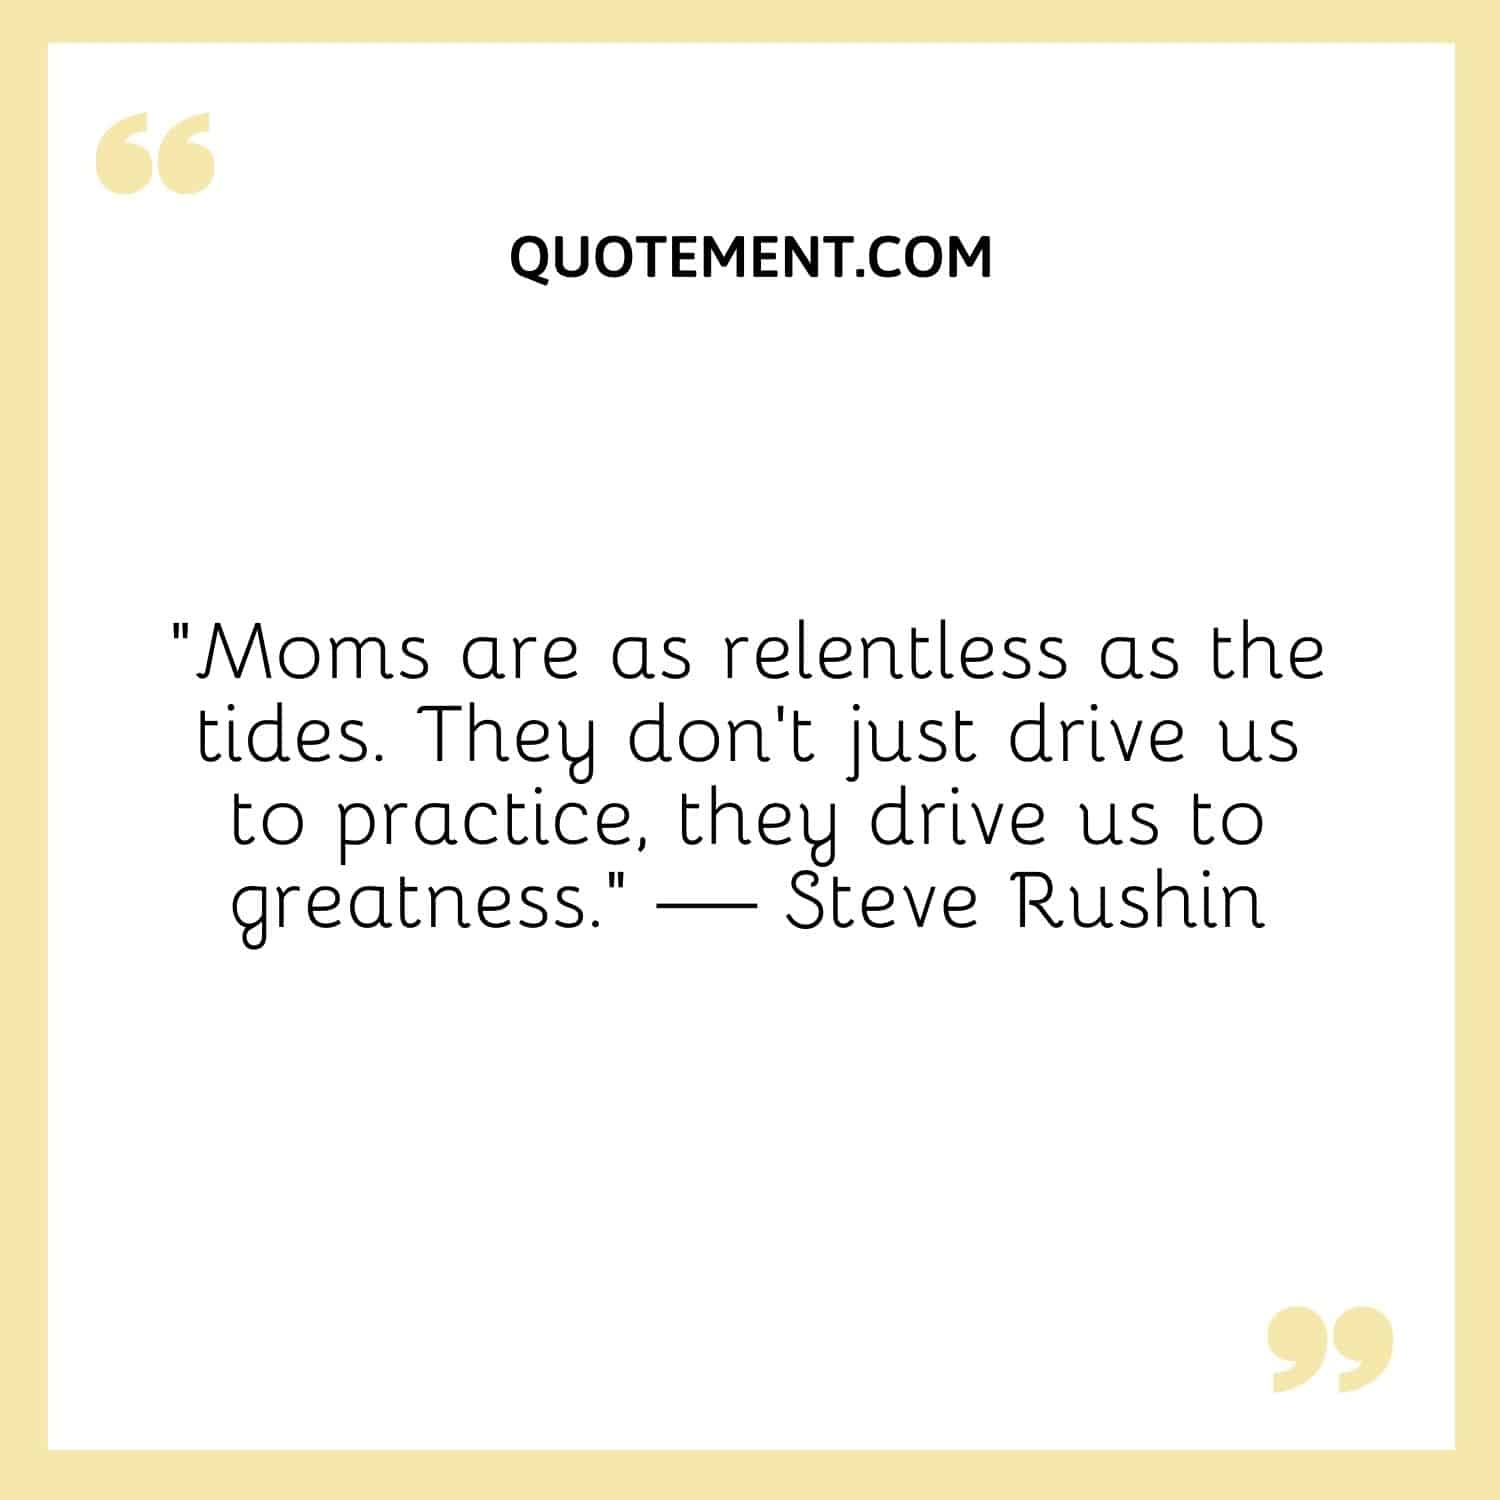 Moms are as relentless as the tides.